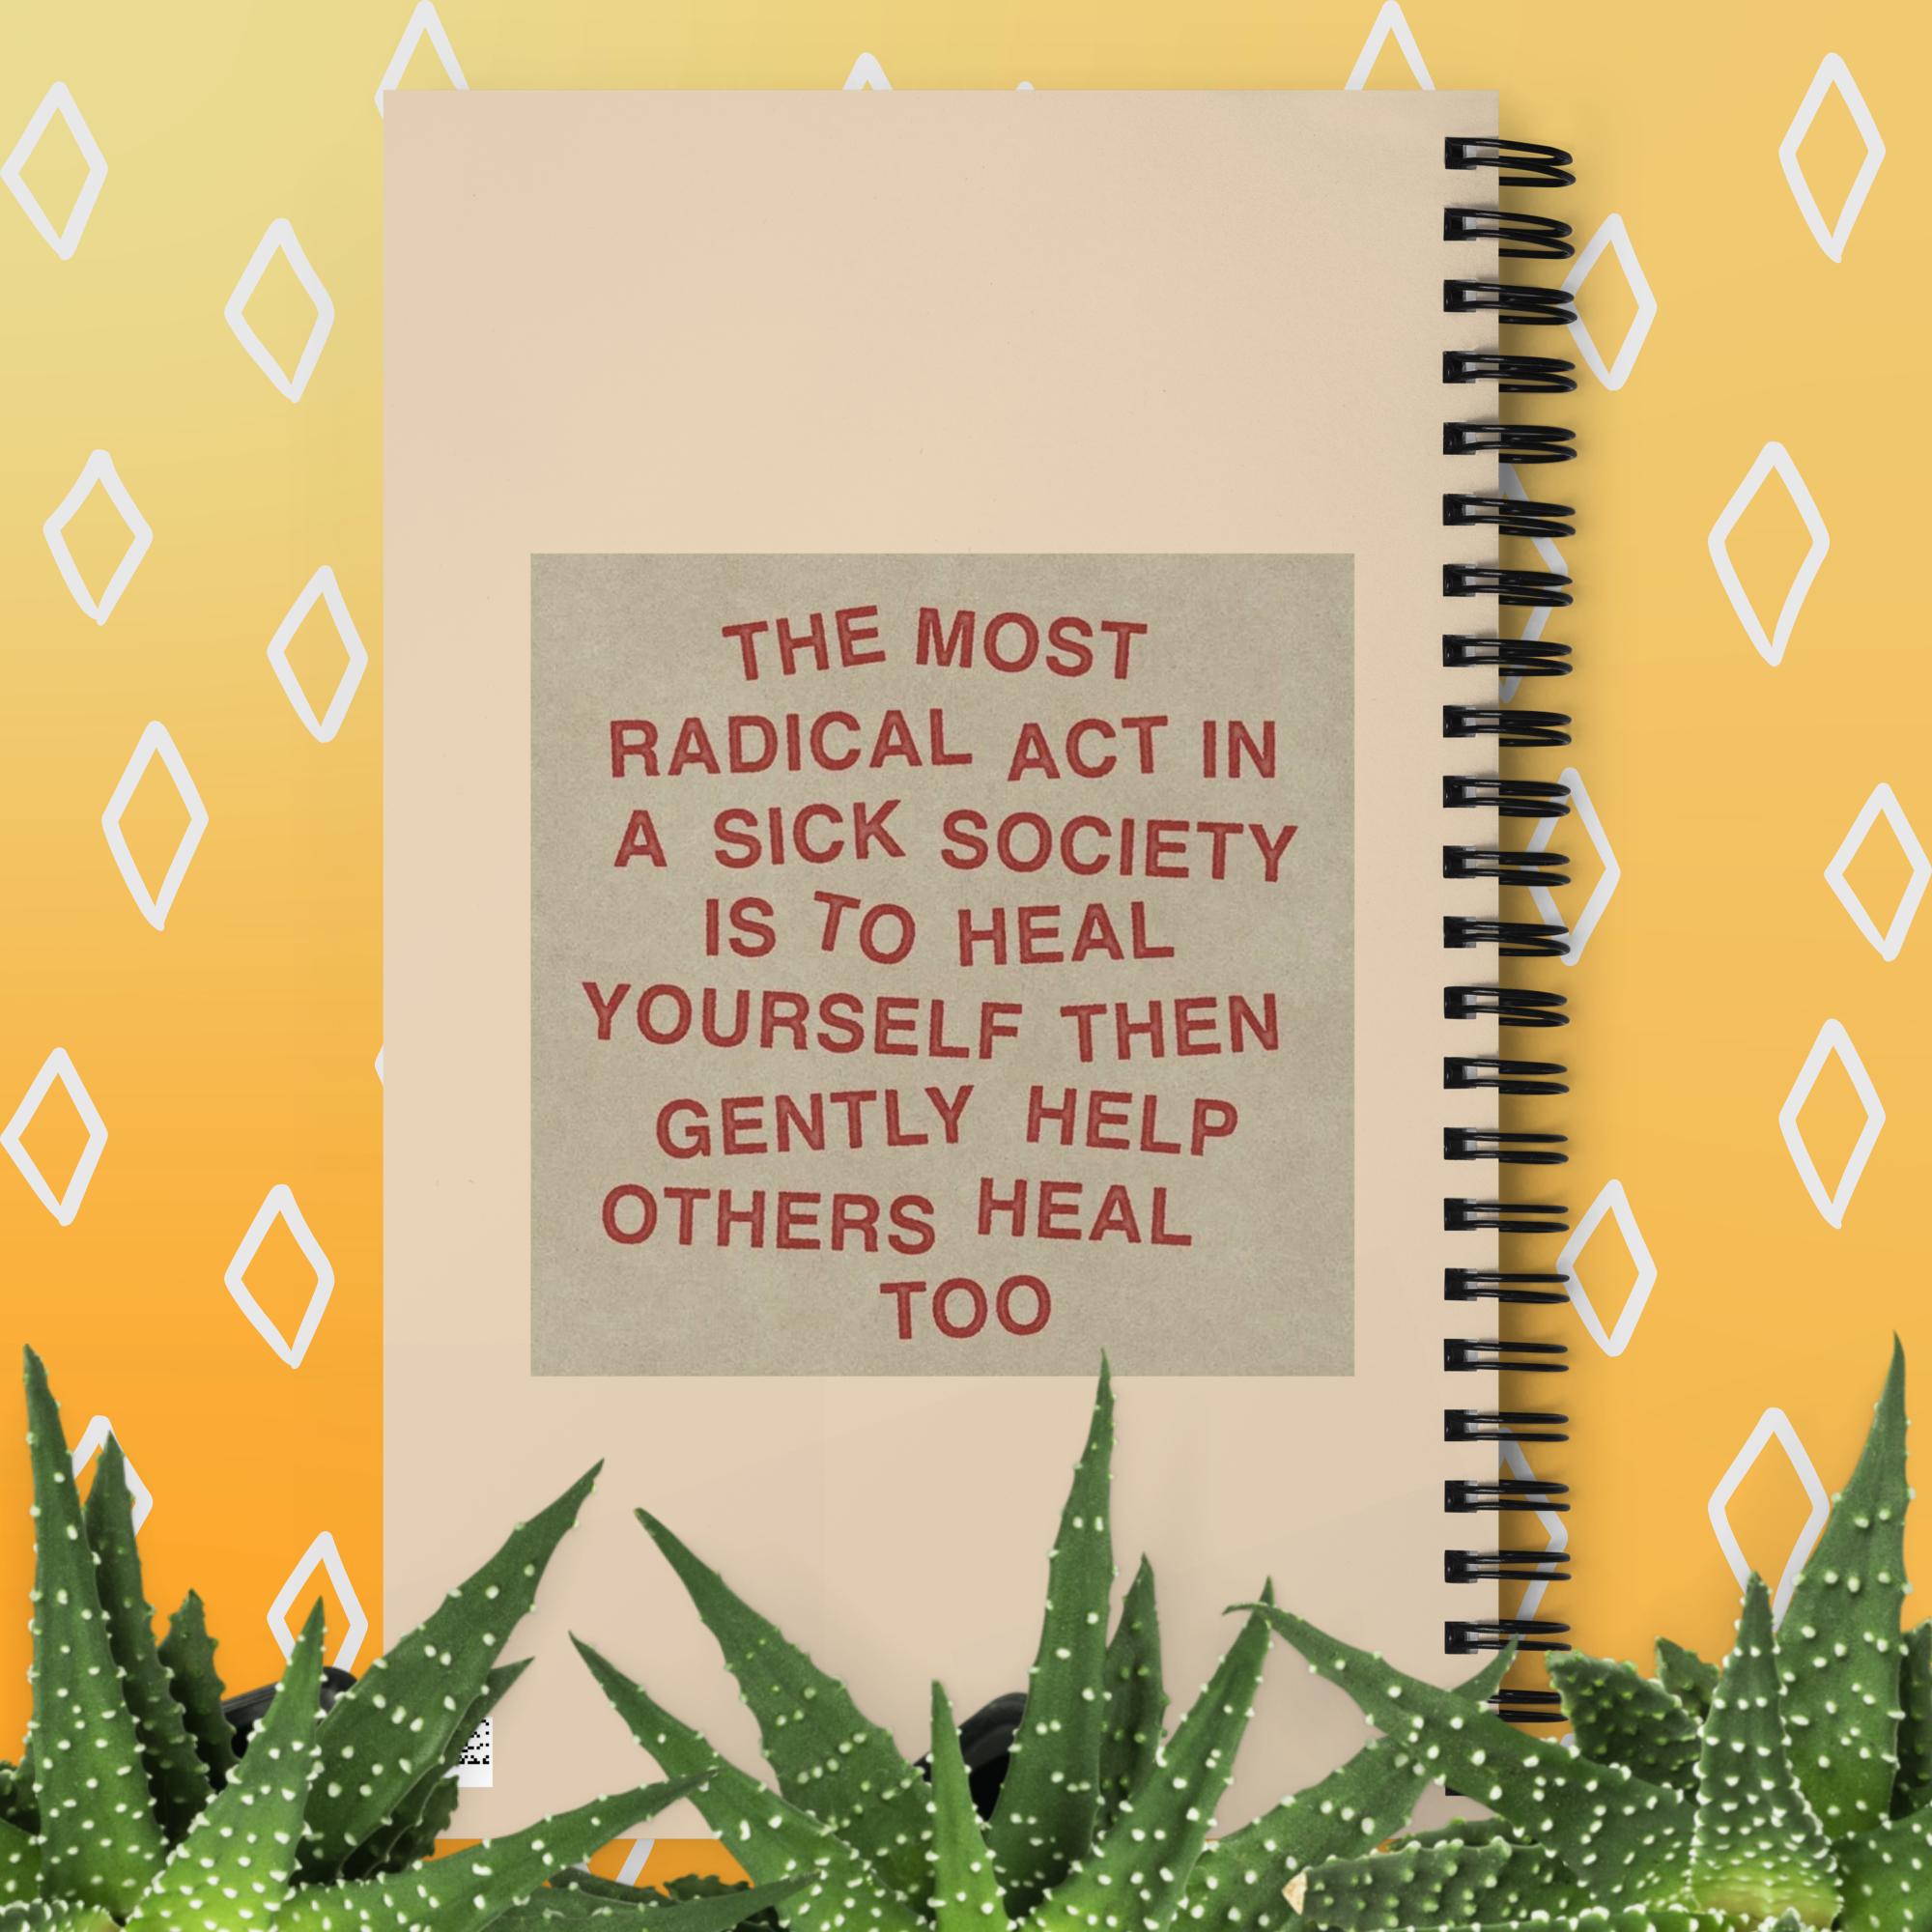 The most radical act in a sick society, heal yourself, then heal others Spiral notebook notepad journal diary back